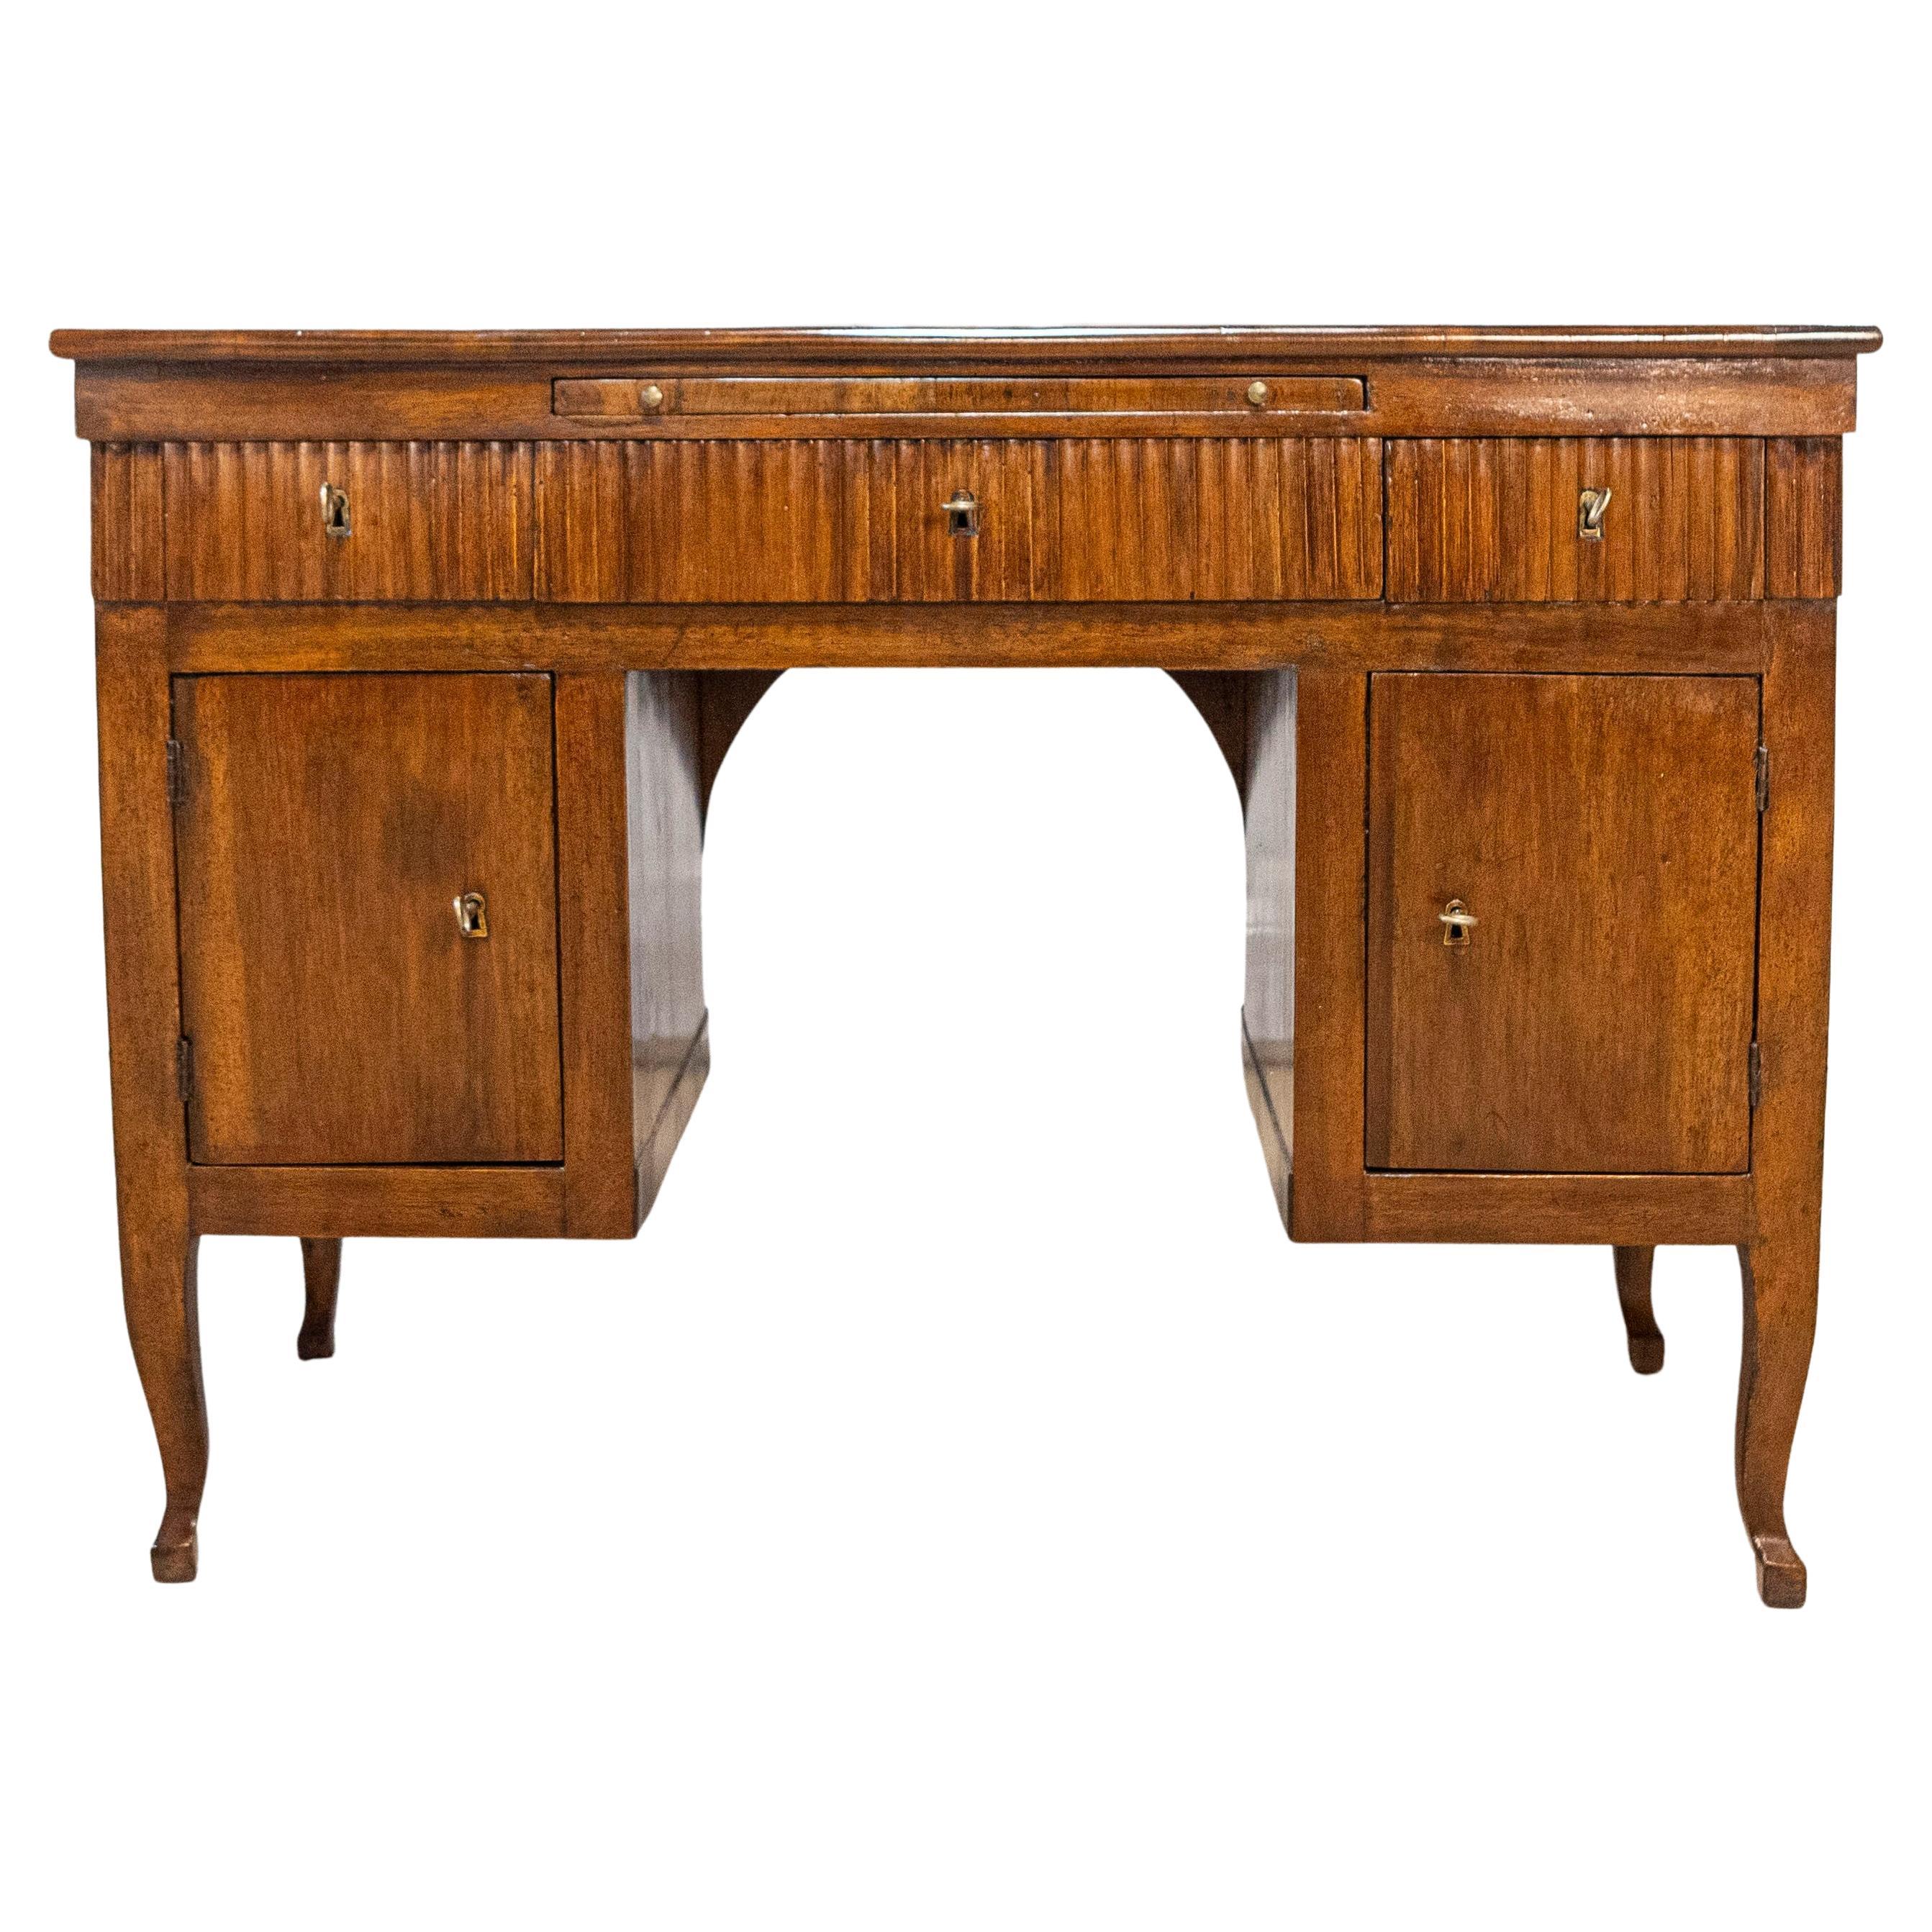 Italian 18th Century Walnut Desk with Carved Reeded Apron, Drawers and Doors For Sale